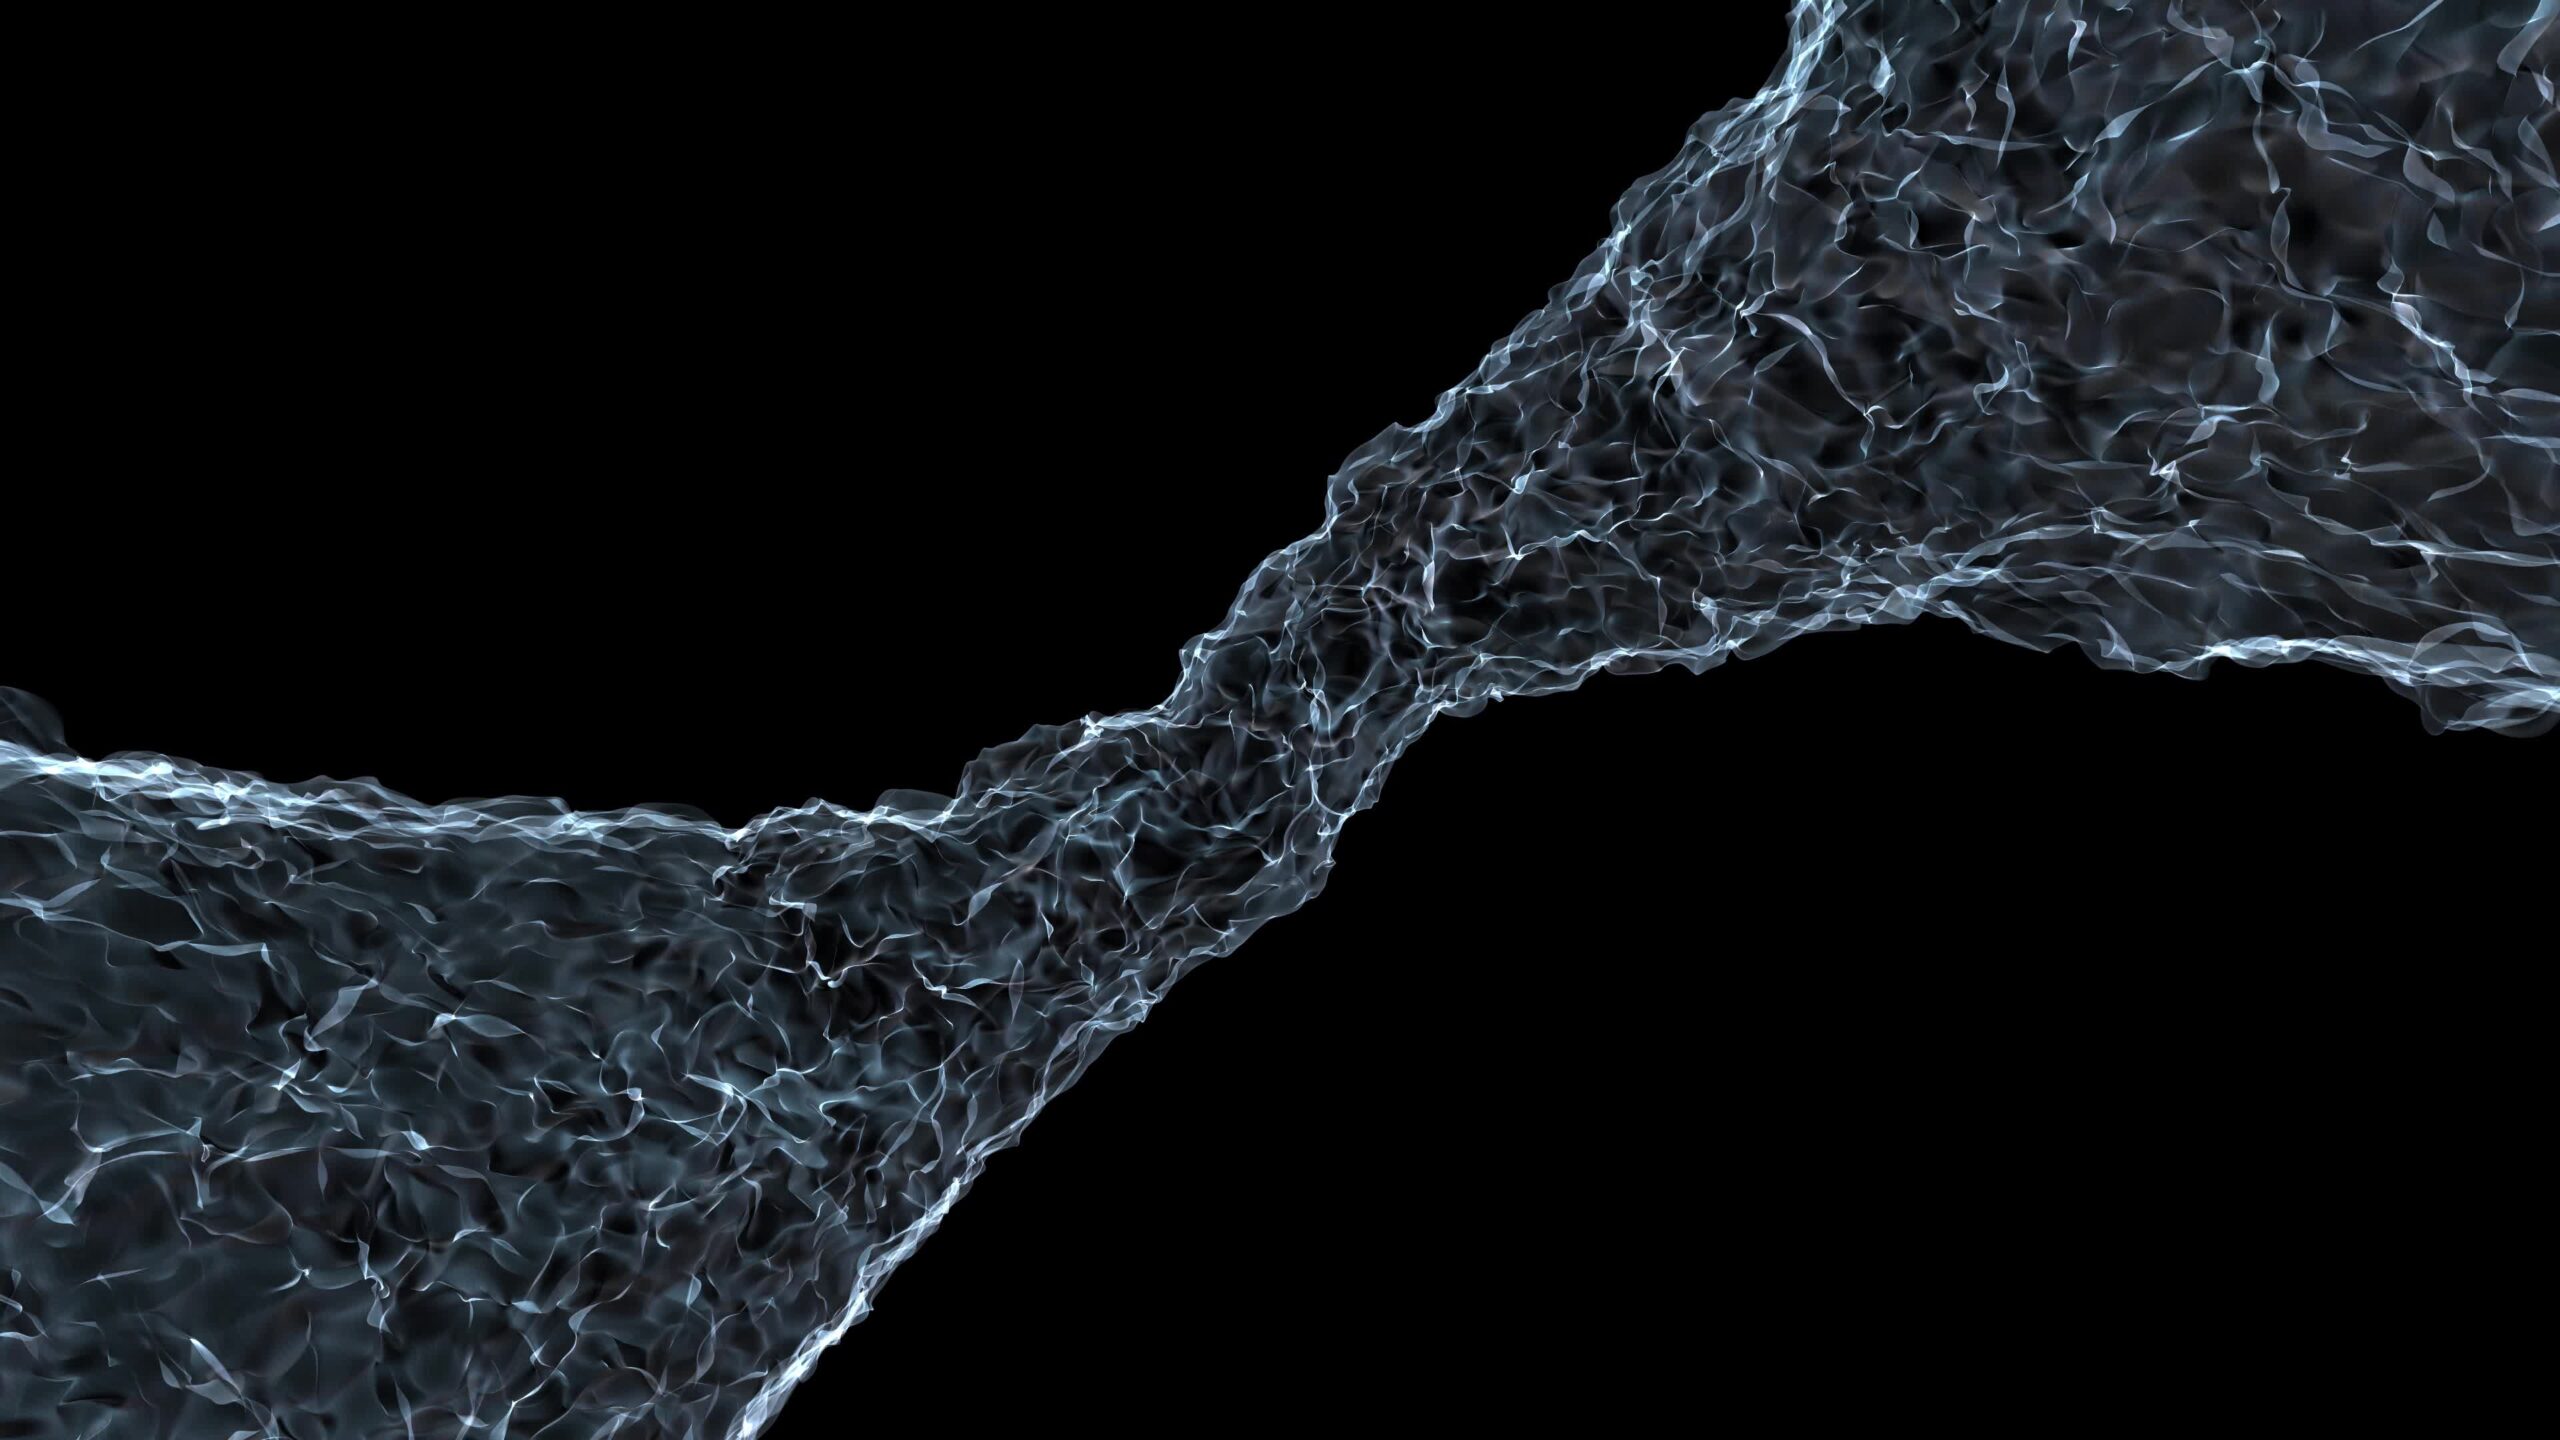 Abstract fluid flows on a black background